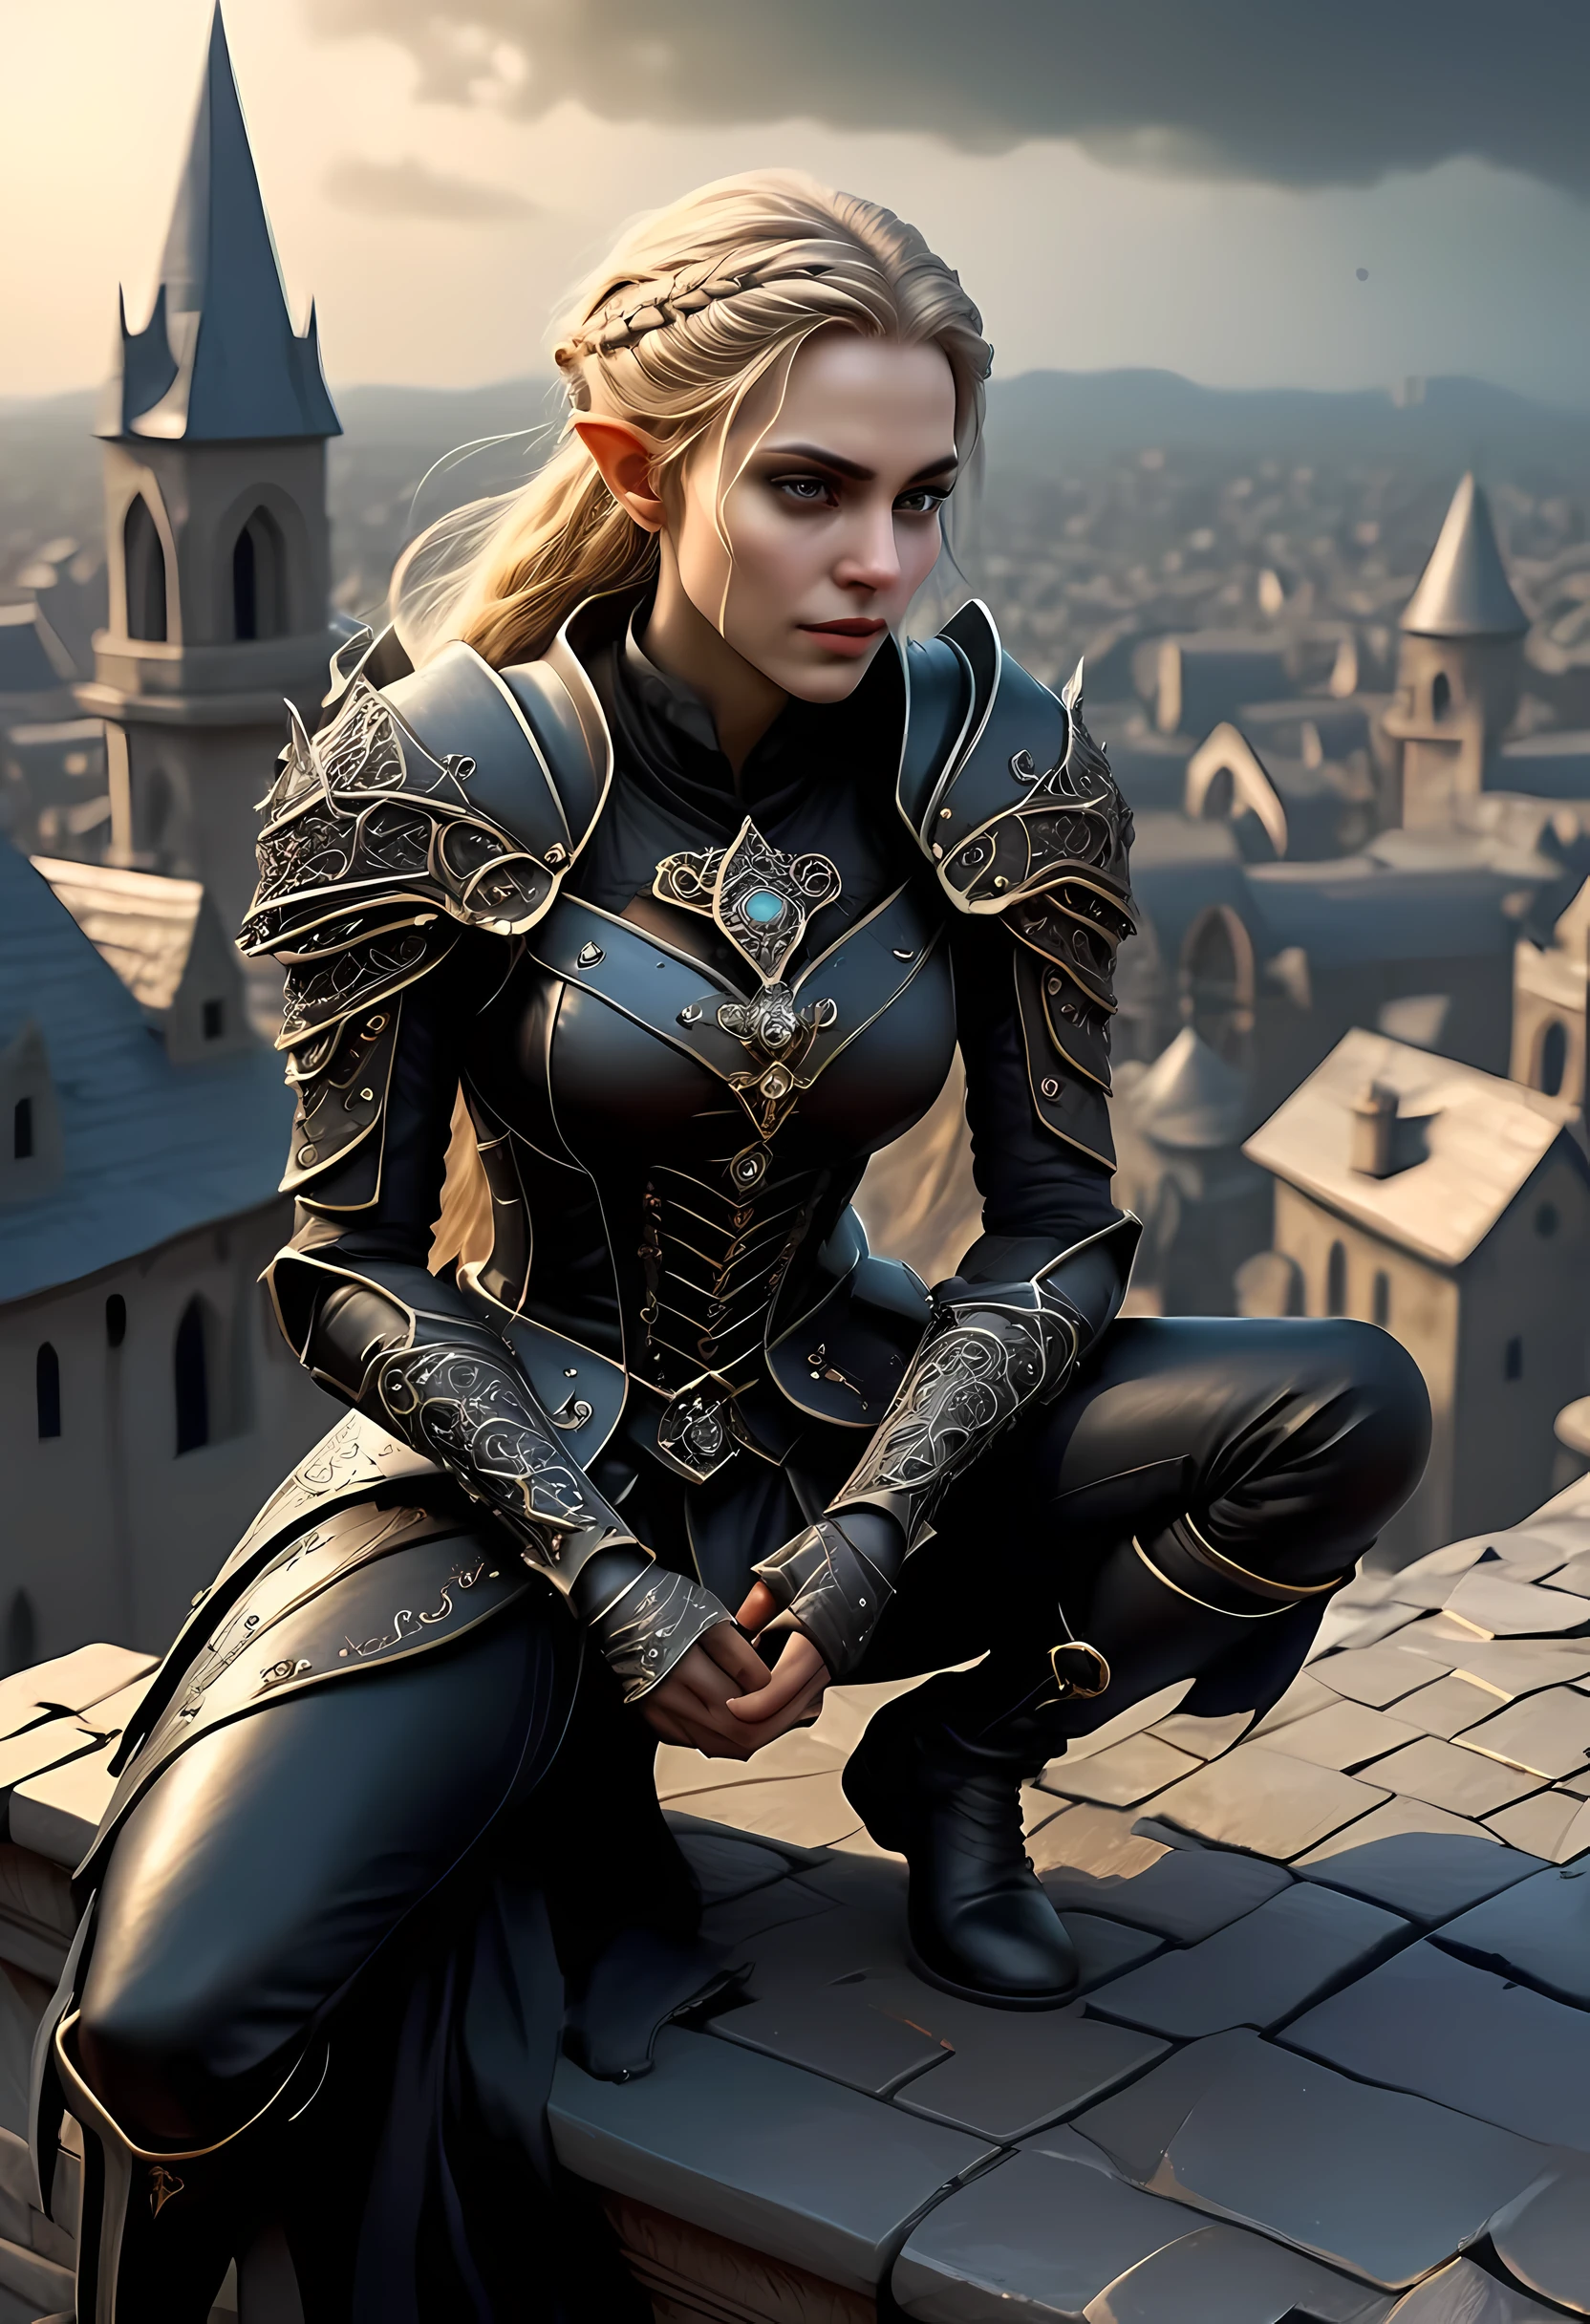 fAntAsy Art, D&D Art, rpg Art, reAlistic Art, goth Art, A, high DetAils, best quAlity, 16k, [ultrA DetAileD], mAsterpiece, best quAlity, (extremely DetAileD), DynAmic Angle, Roh, photoreAlistic, A picture of An epic fAntAsy thief , kniend auf dem Dach (best DetAils, MAsterpiece, best quAlity: 1.5) on top of A roof in goth fAntAsy city, reADy for Action, plenty of builDings, A temple (best DetAils, MAsterpiece, best quAlity: 1.5), femAle elf (best DetAils, MAsterpiece, best quAlity: 1.5), epic fAntAsy thief, [[AnAtomicAlly correct]], blonD hAir, brAiDeD hAir, fAir skin, intensiv leuchtende Augen, ArmeD with DAgger, DynAmic position (intricAte DetAils, MAsterpiece, best quAlity: 1.5), smAll pointeD eArs, DArk Armor, full leAther Armor (intricAte DetAils, MAsterpiece, best quAlity: 1.5), tense Atmosphere, Nacht, stArs light, Mondlicht, moon rAys, stArs, best DetAils, best quAlity, highres, ultrA wiDe Angle, DrkfntAsy Nacht over the roof top of A goth church, the elf wAtches the city below,  it is reADy to Act, meDievAl city bAckgrounD